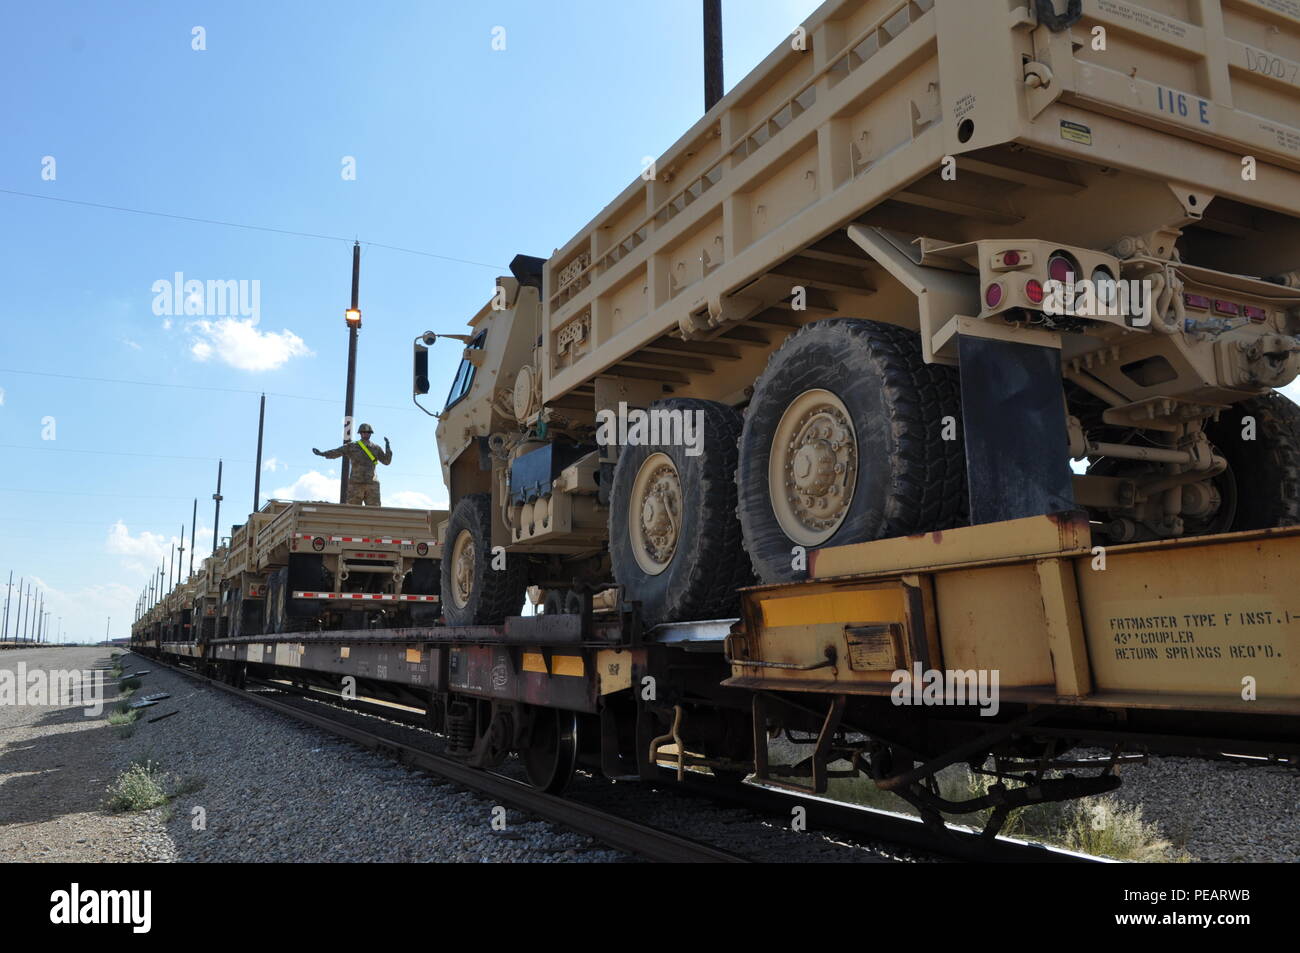 Sgt. Ben Davis, standing atop railcar, allied trade specialist, 682nd Engineer Battalion, guides the driver of the five-ton dump truck as it is being loaded onto flatcars for shipment. The spanner can be seen between the two rear wheels, connecting the two flatcars allowing the equipment to advance. The loading process for all heavy machinery is a three man job, with a ground guide in front to guide the machine, the driver or heavy machine operator who operates the equipment and a ground spotter, who ensures the spanners are in place so that the machine can move across the gaps between flatcar Stock Photo